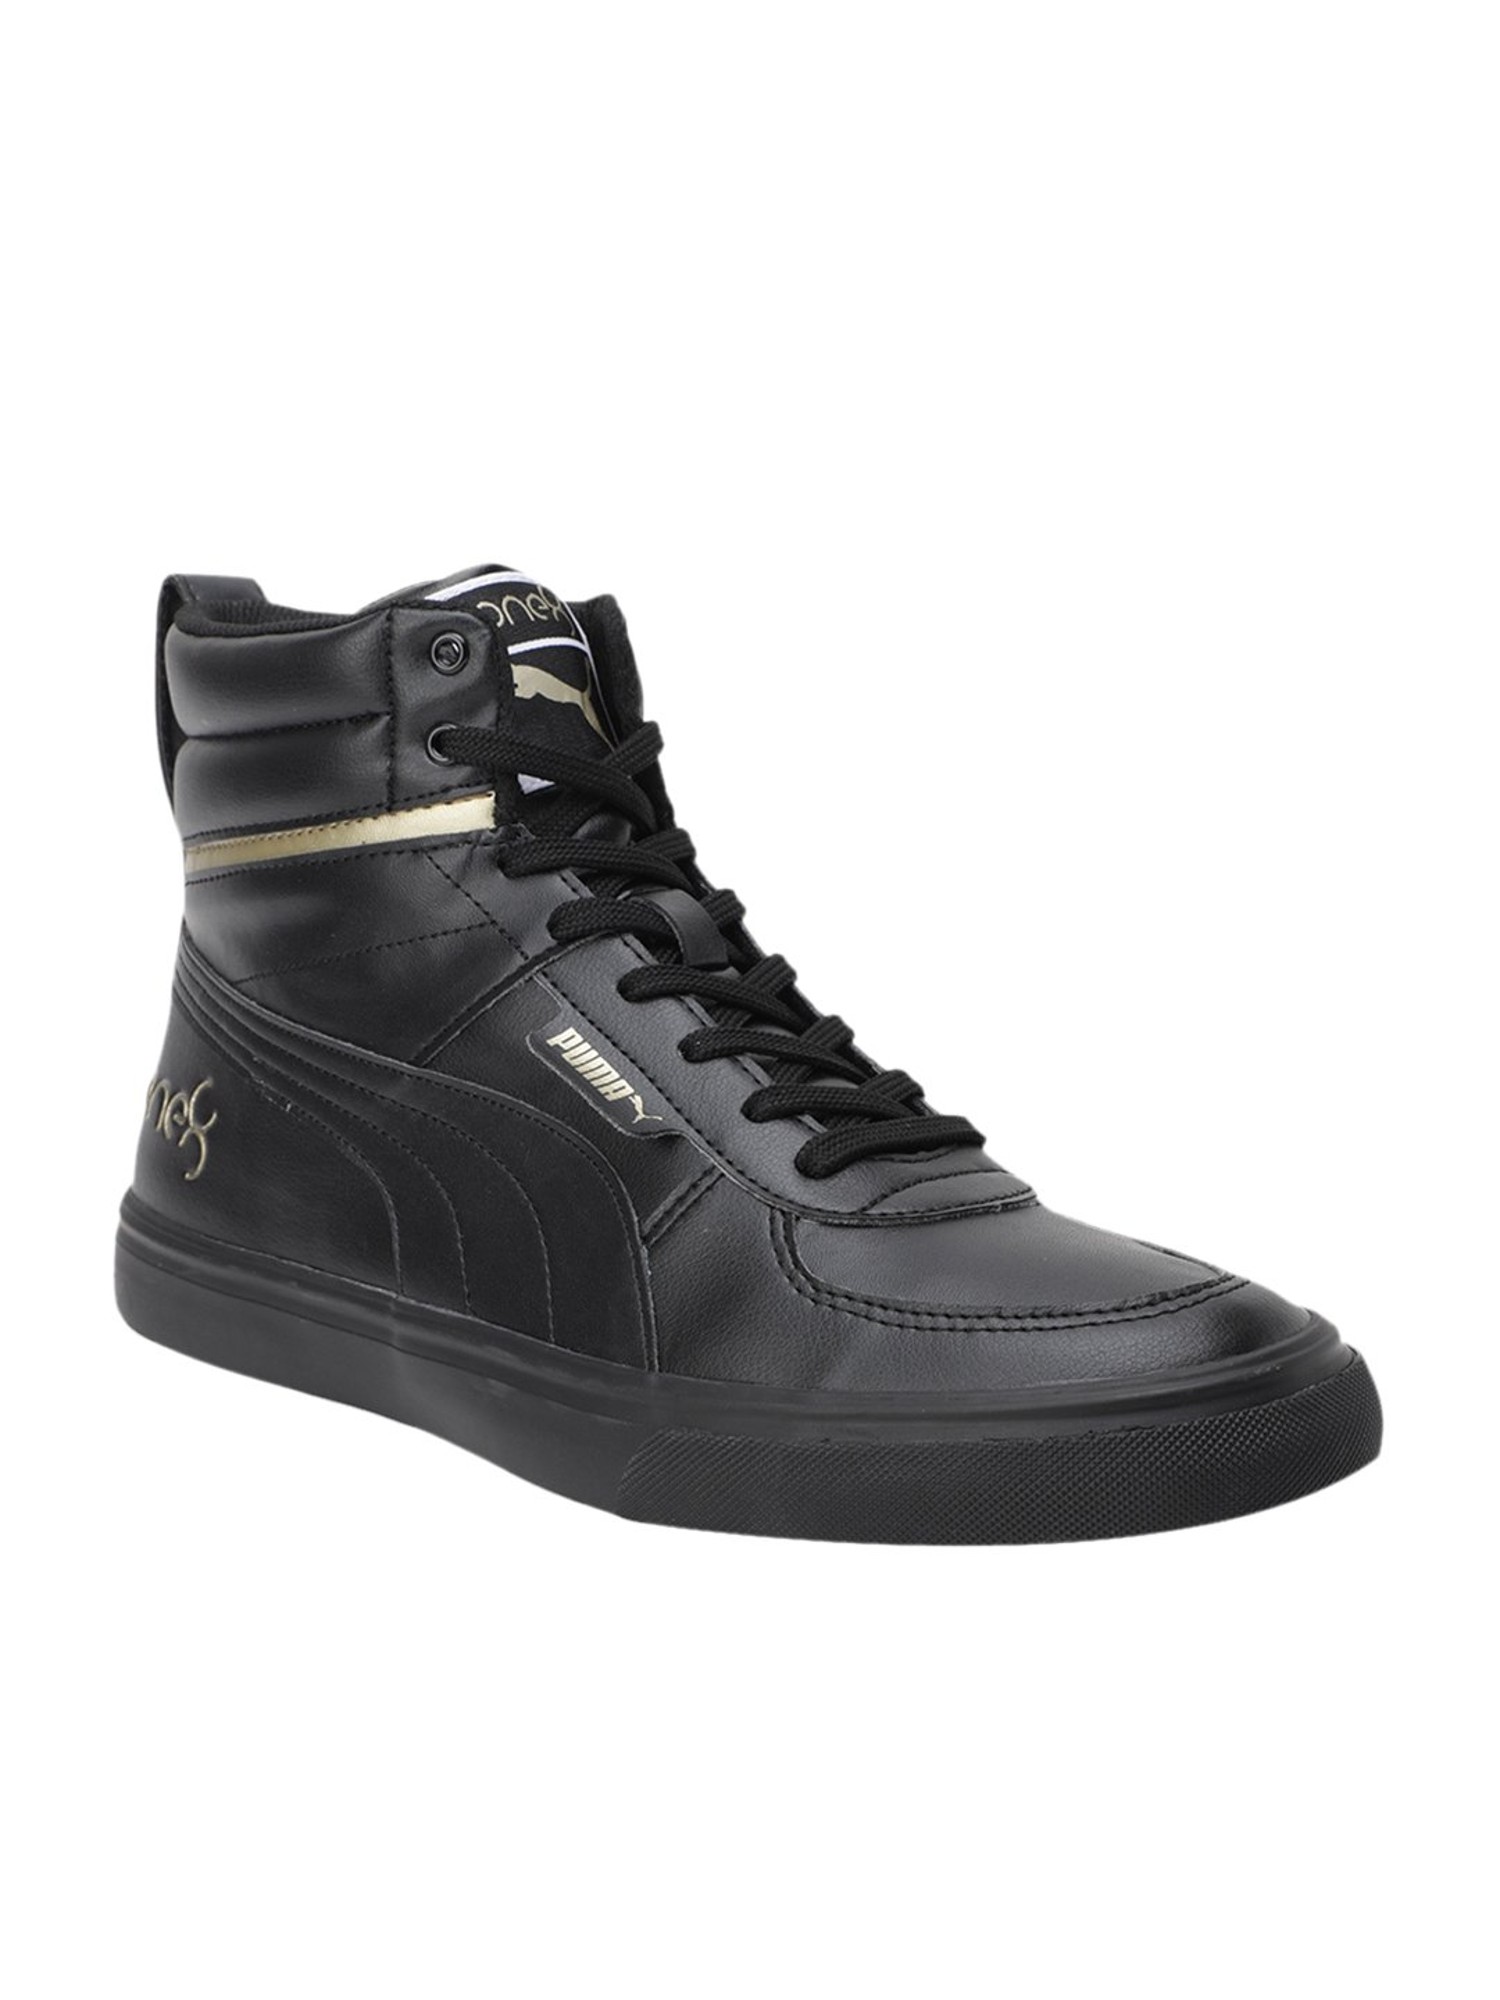 Discover 153+ puma one8 sneakers black best